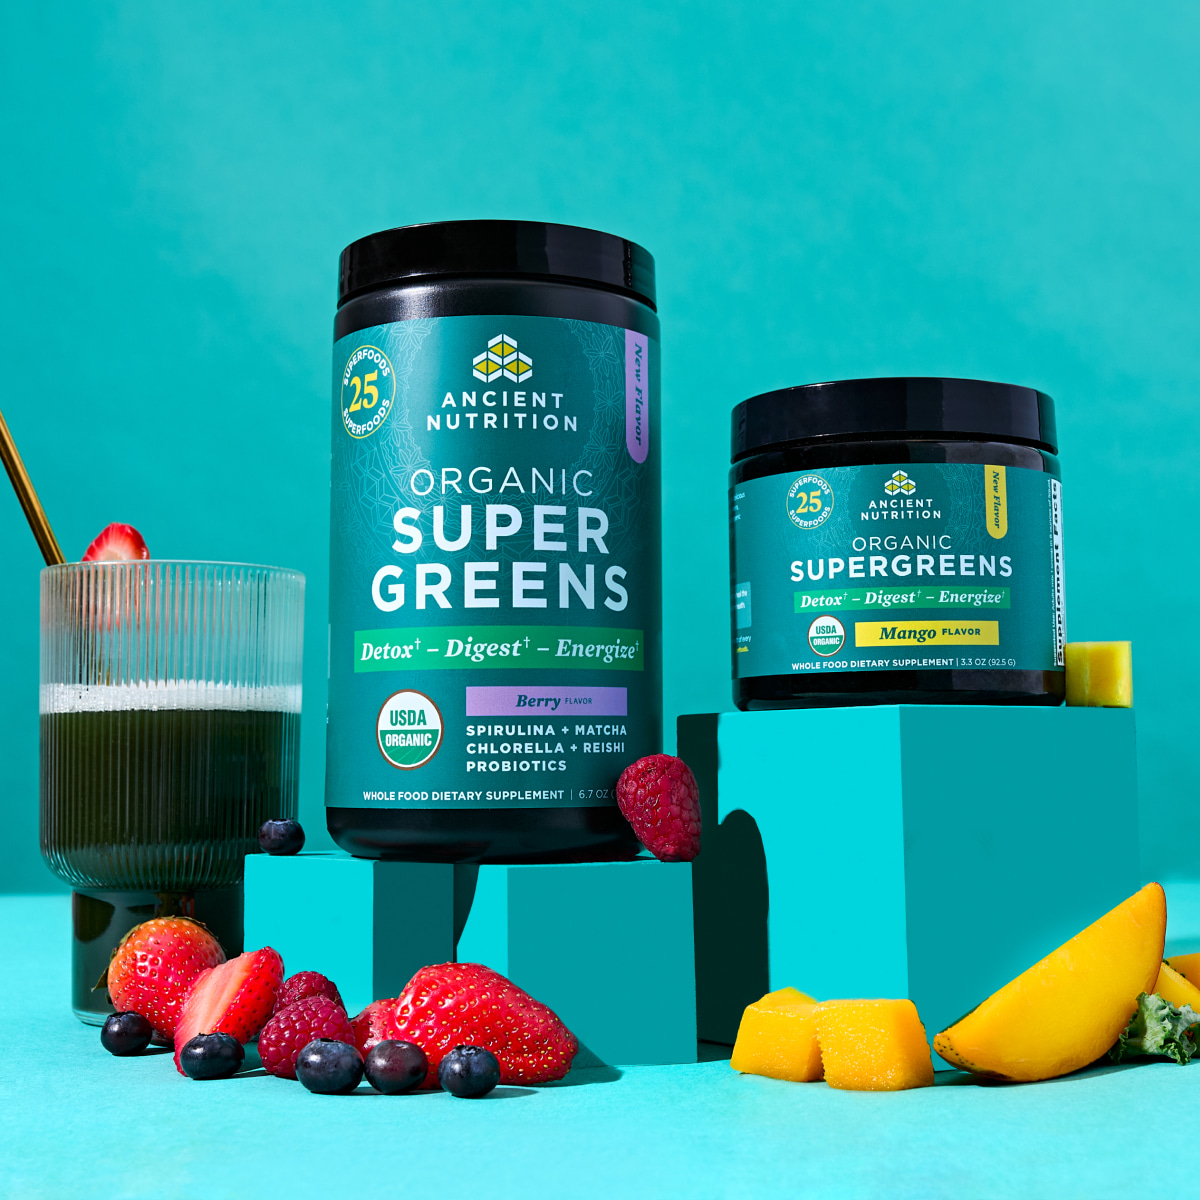 organic supergreens mango and berry bottles on a teal backgrouond